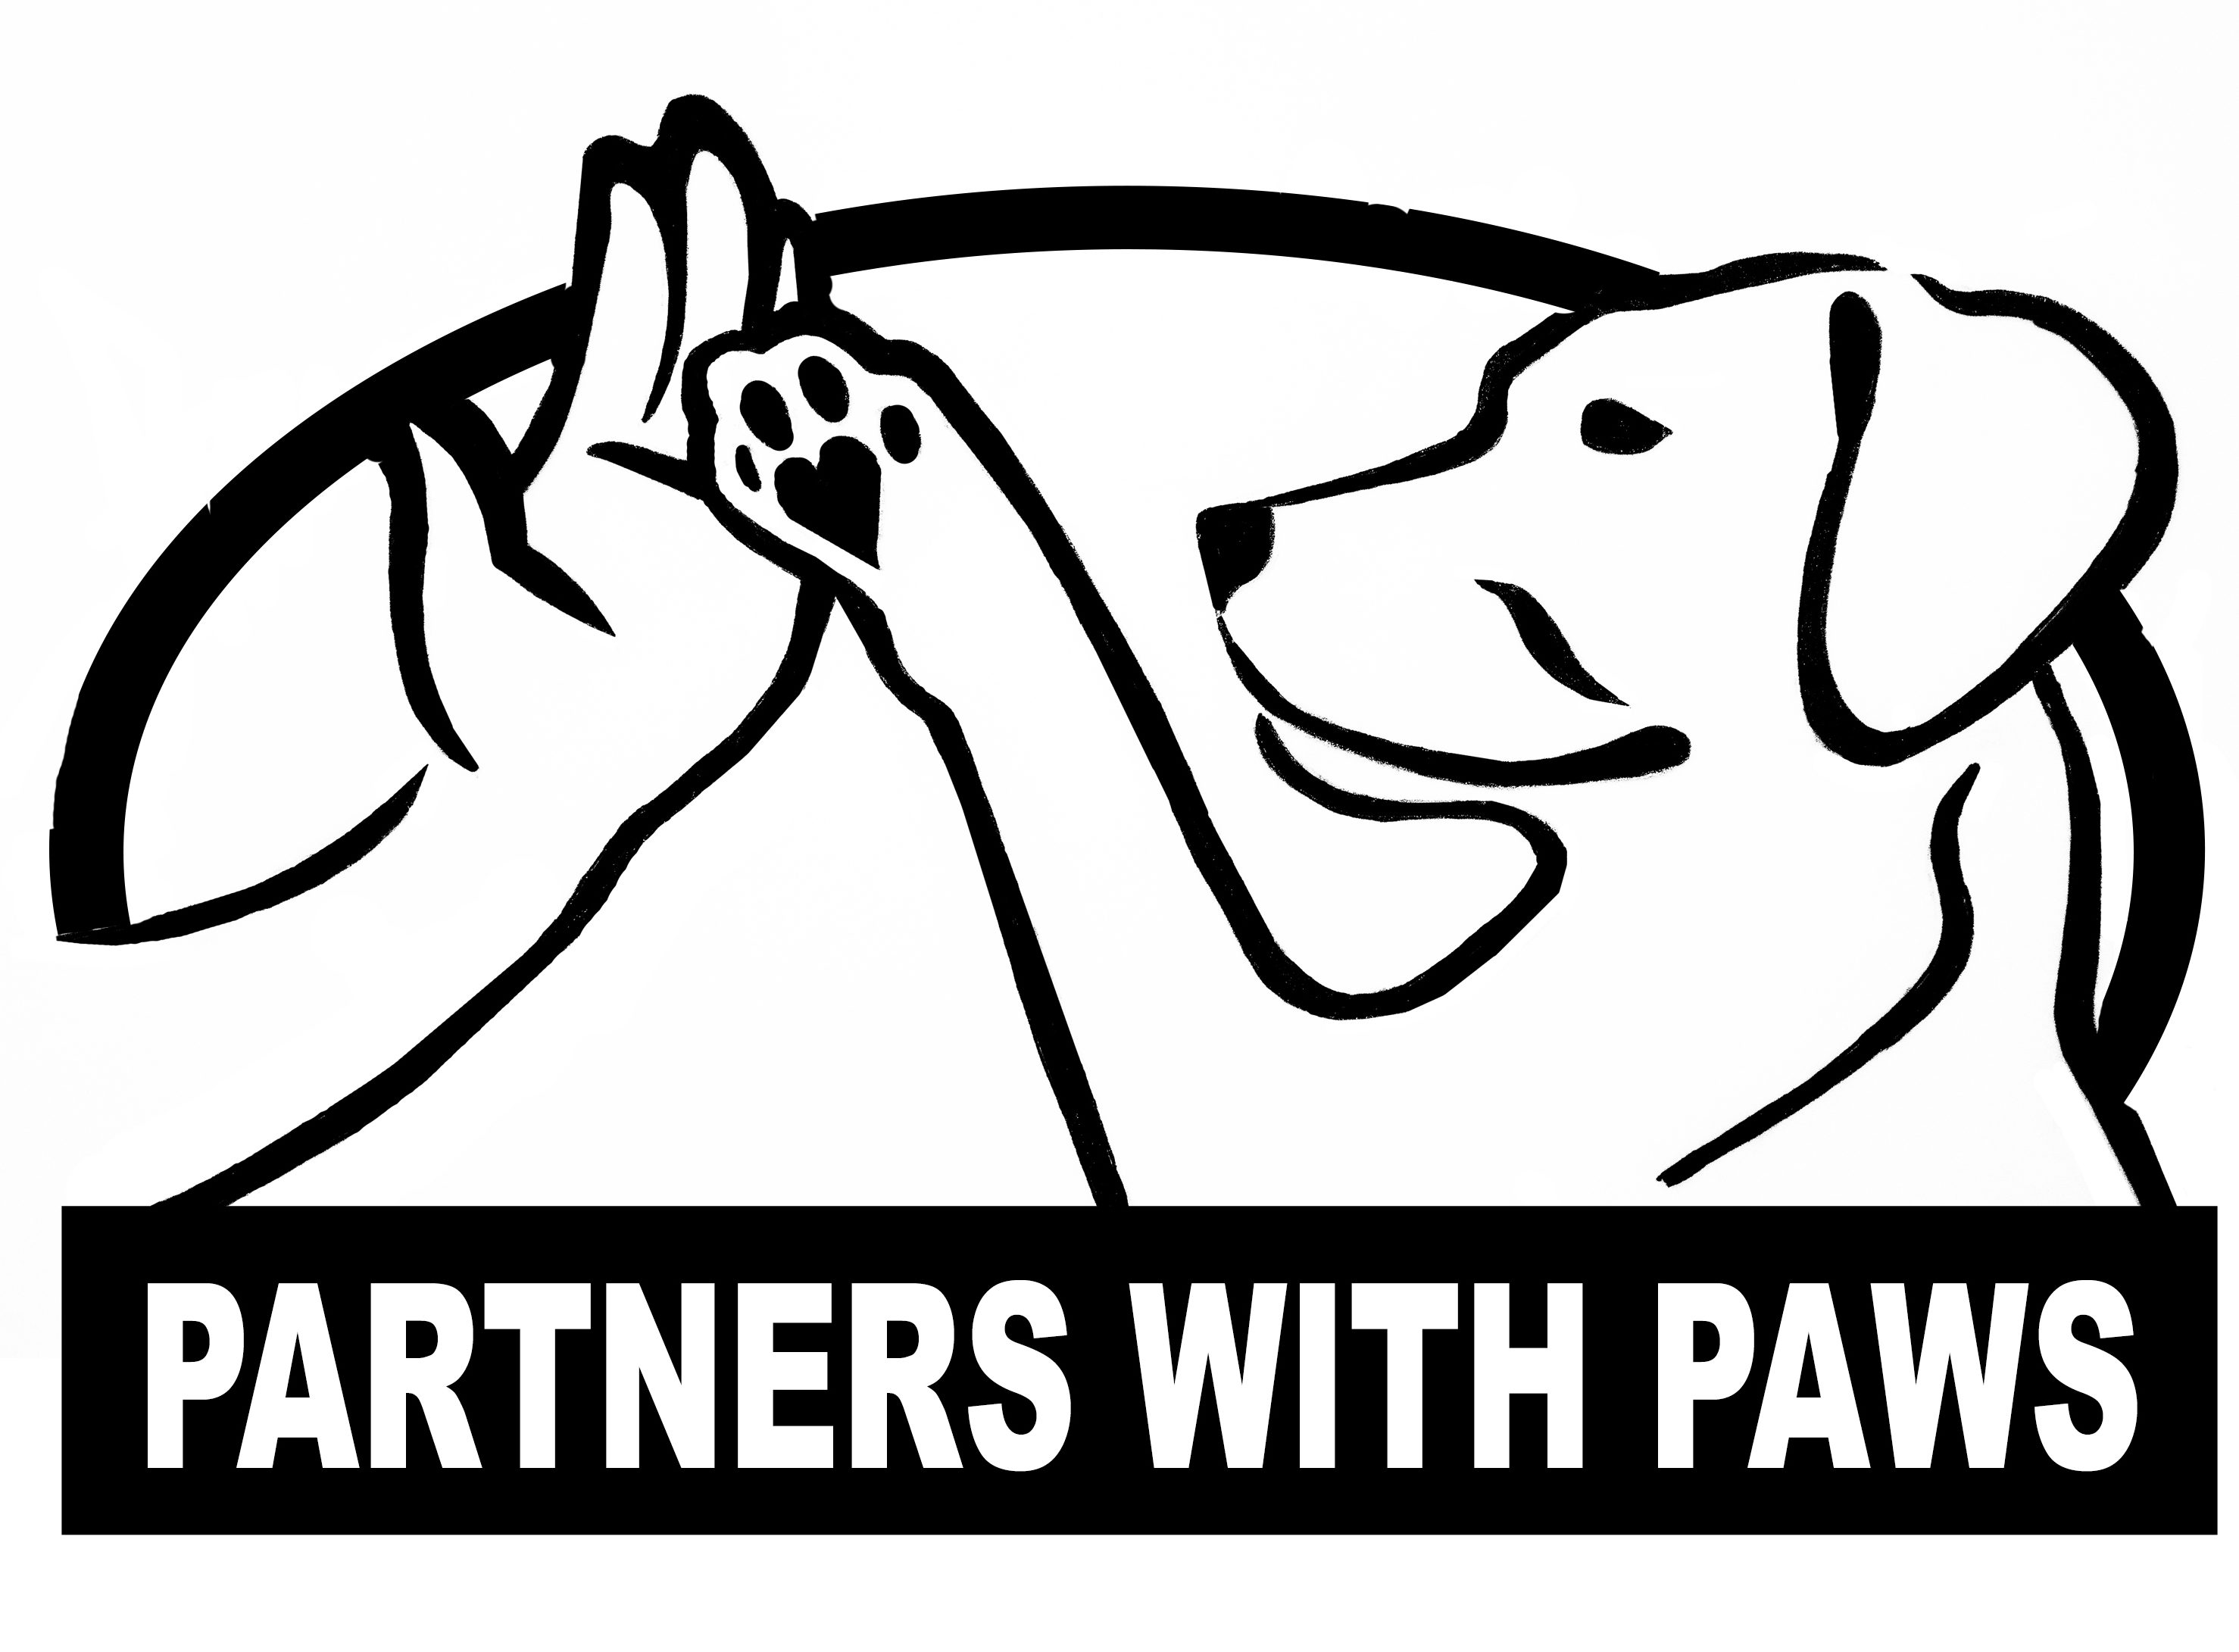 Partners with Paws